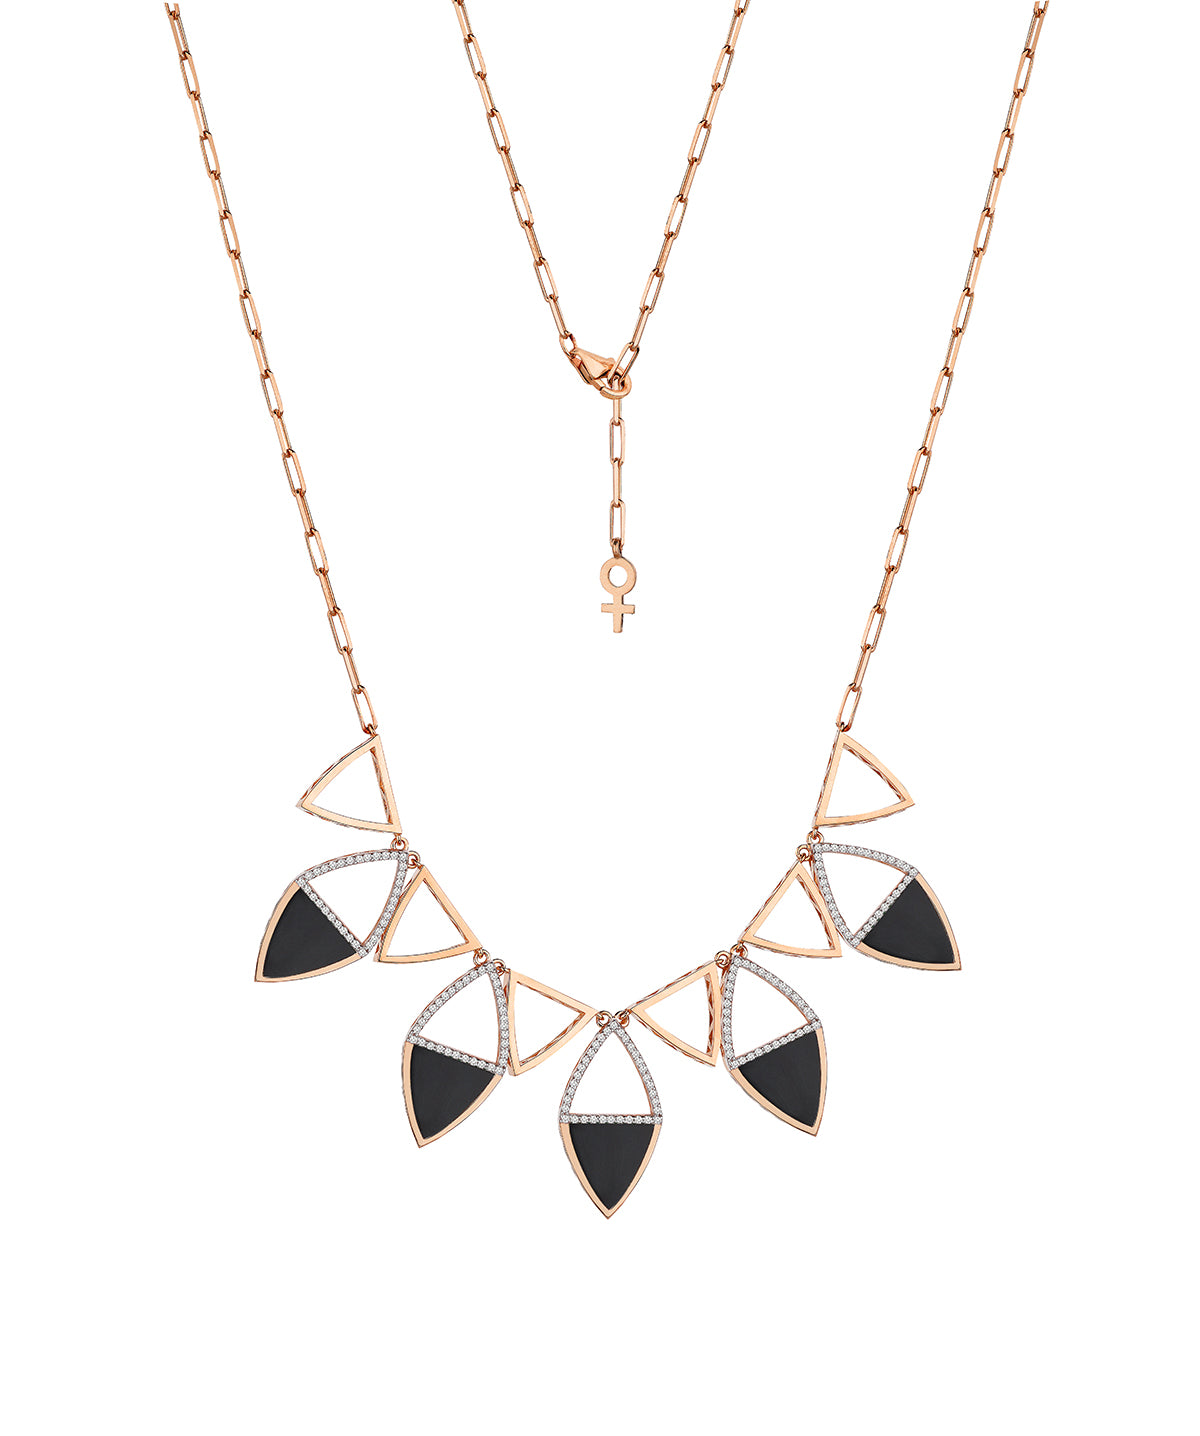 Feminine Glory Black Necklace in Rose Gold - Her Story Shop